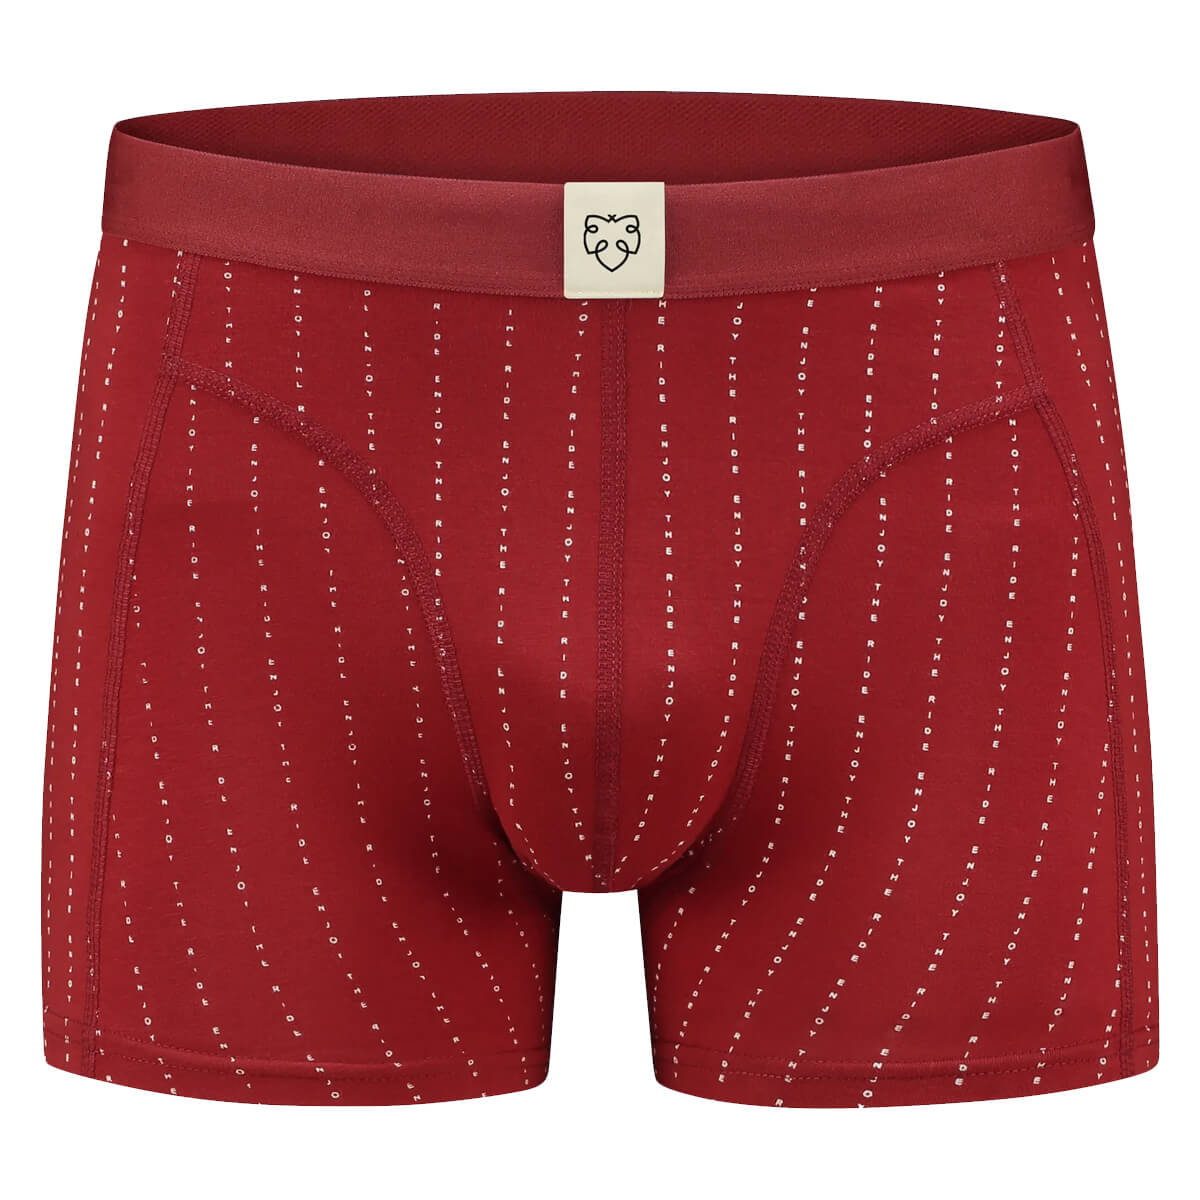 https://www.obsession.si/images/thumbs/0720877_adam-bloody-stripes-boxer-briefs-assorted-m.jpeg